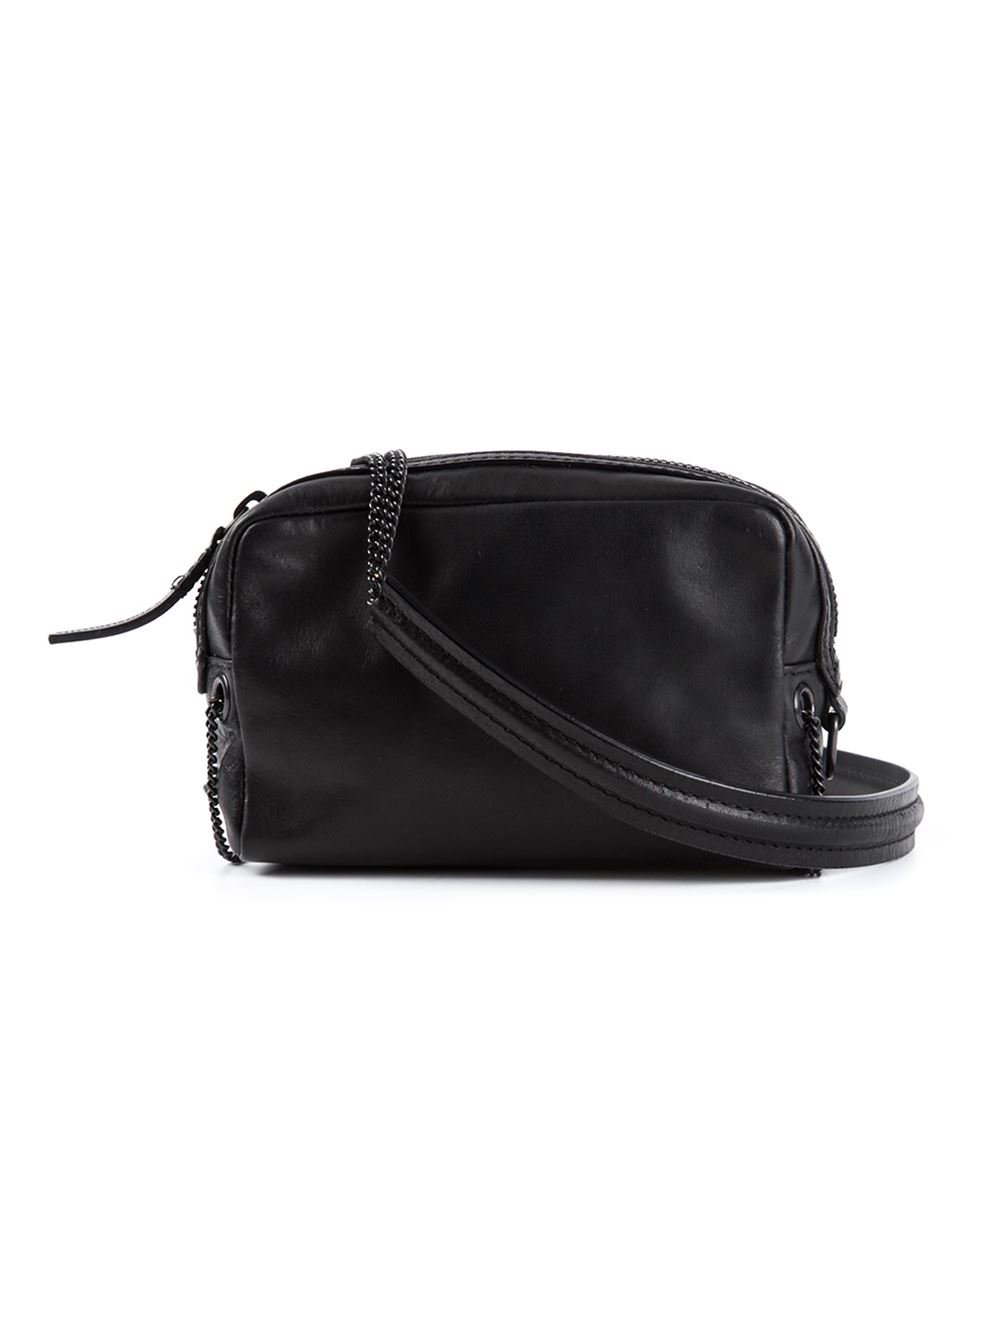 Lyst - Ann Demeulemeester Small Chain Strap Shoulder Bag in Black